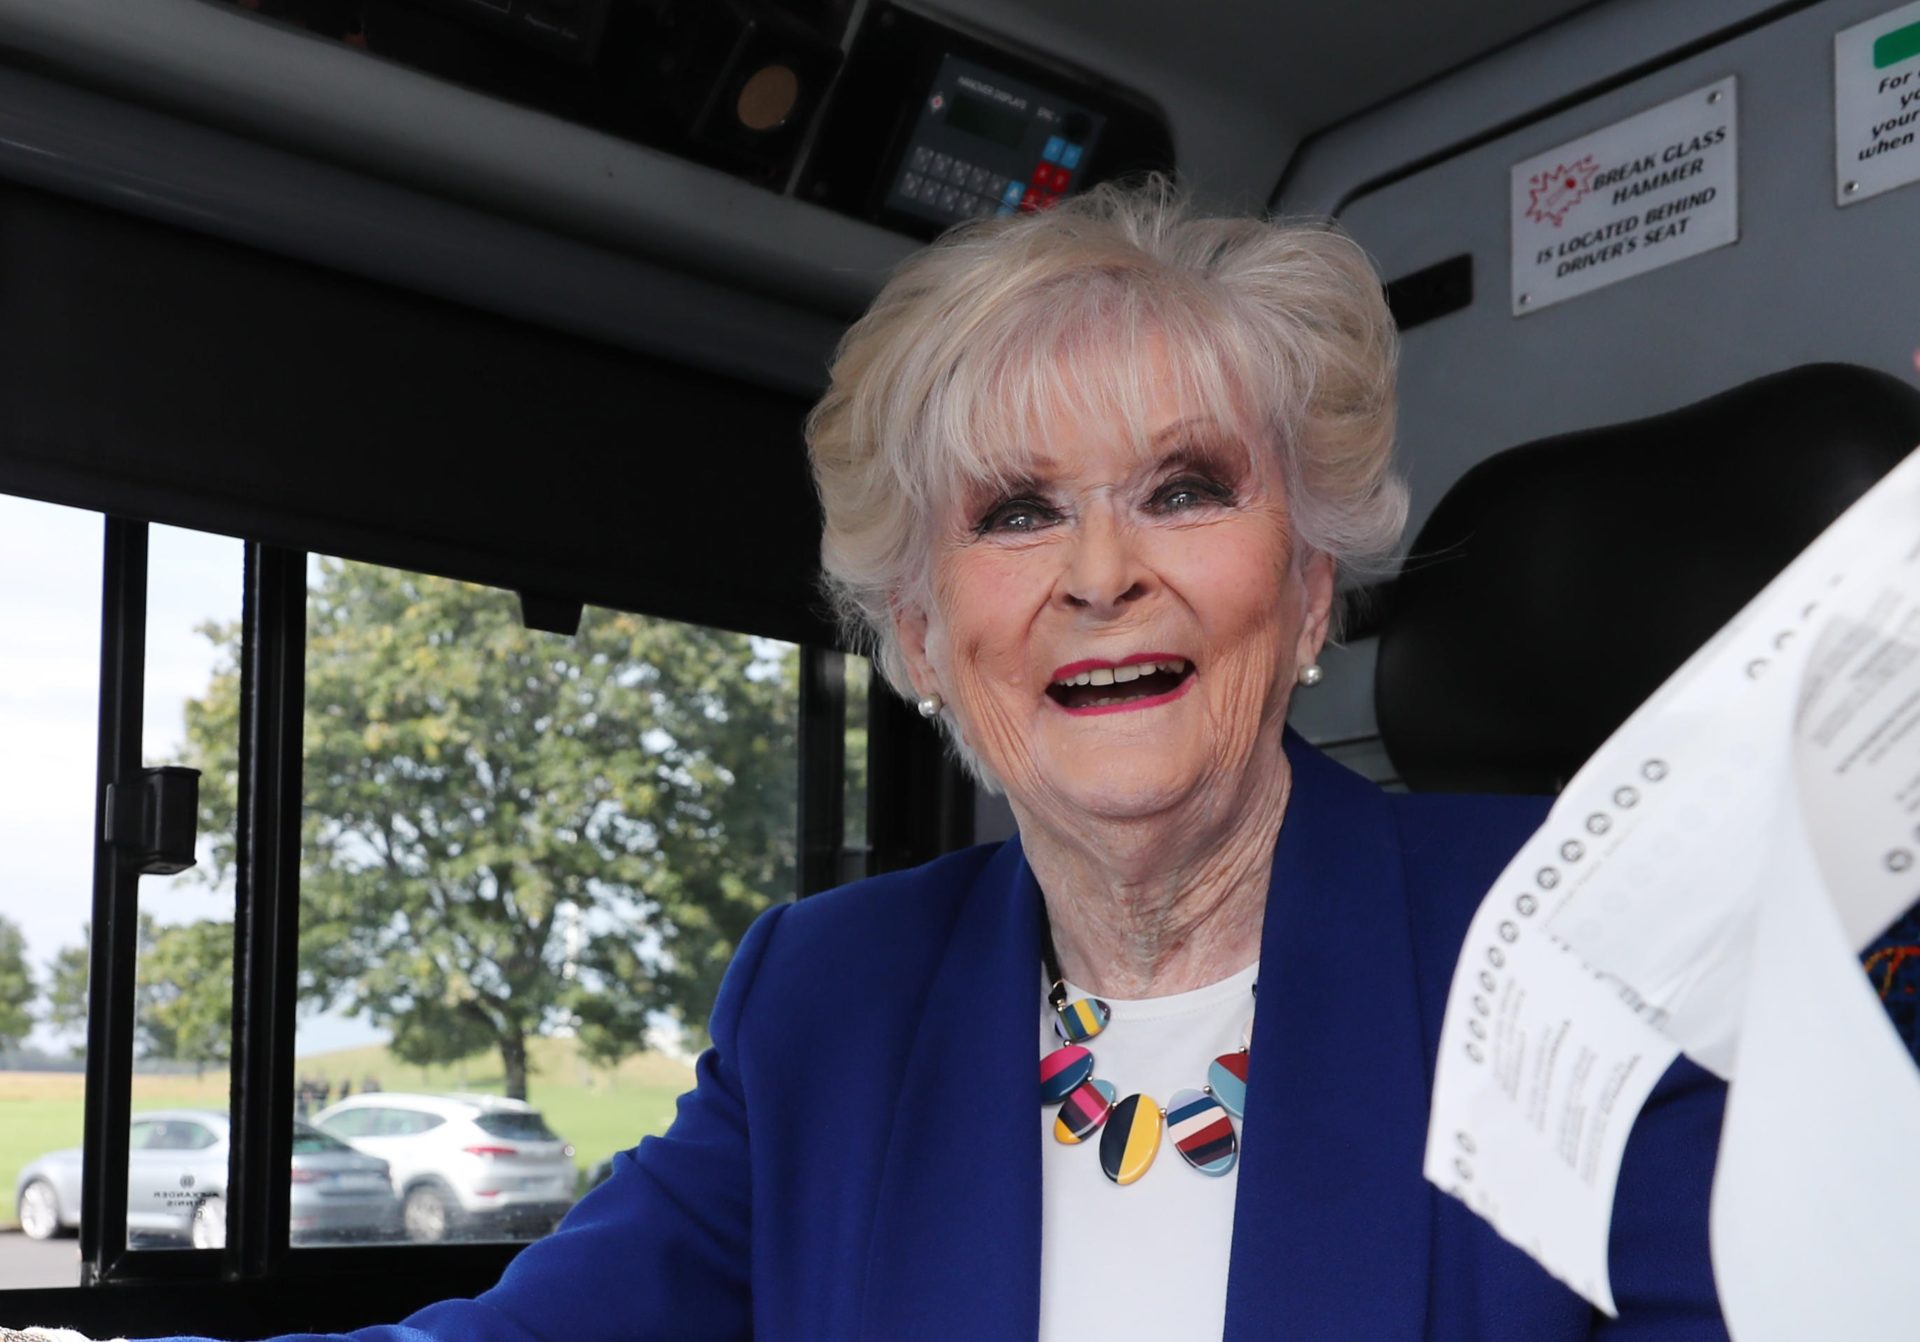 Rosemary Smith at the Launch of Dublin Buses "Give it a Spin" recruitment drive, 20-8-19.